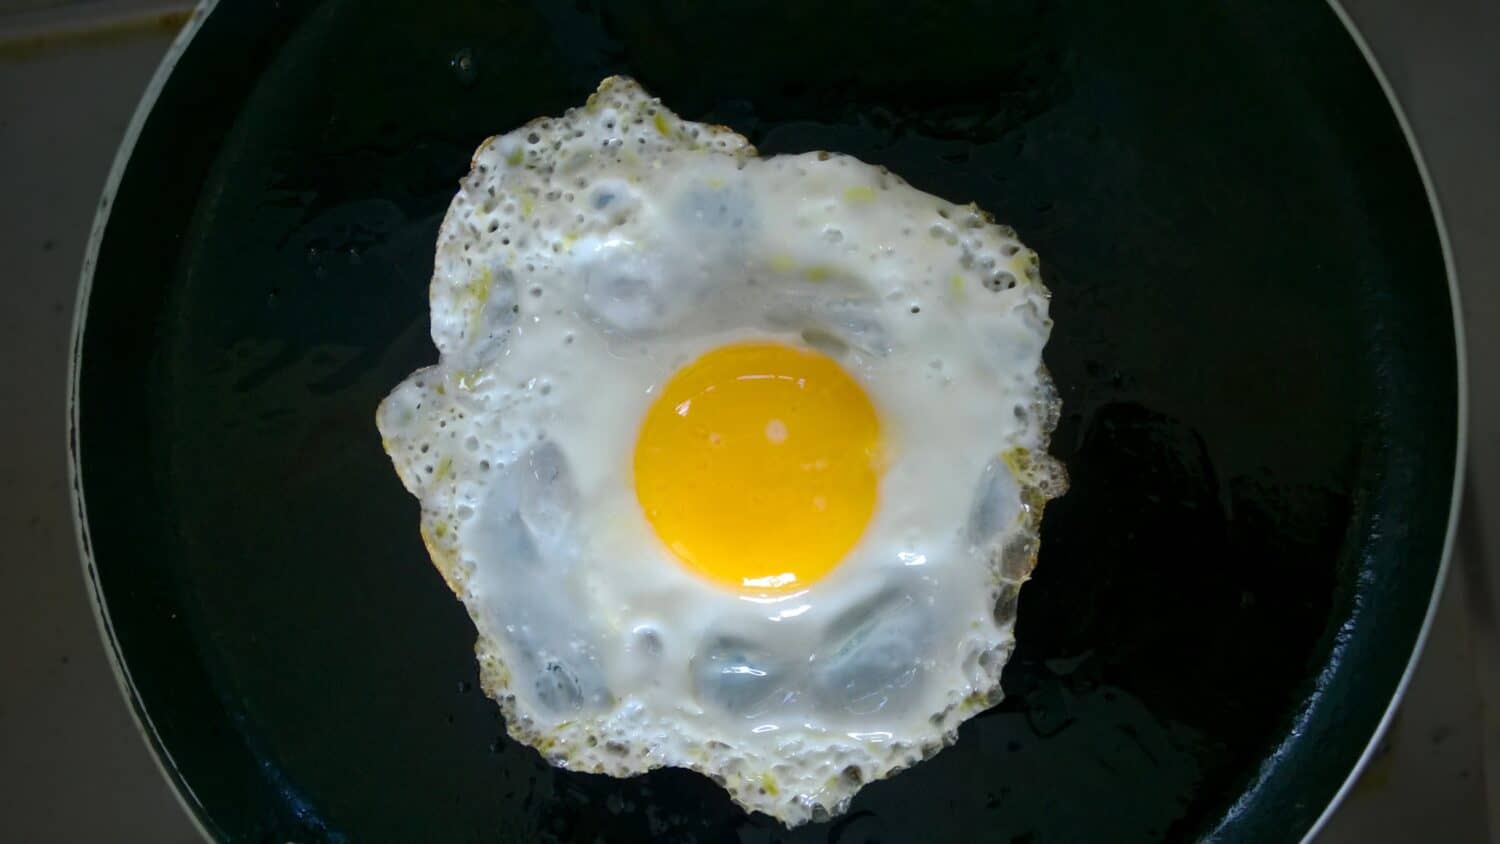 Sunny side up poached egg or omelette on a skillet or pan. Top view.